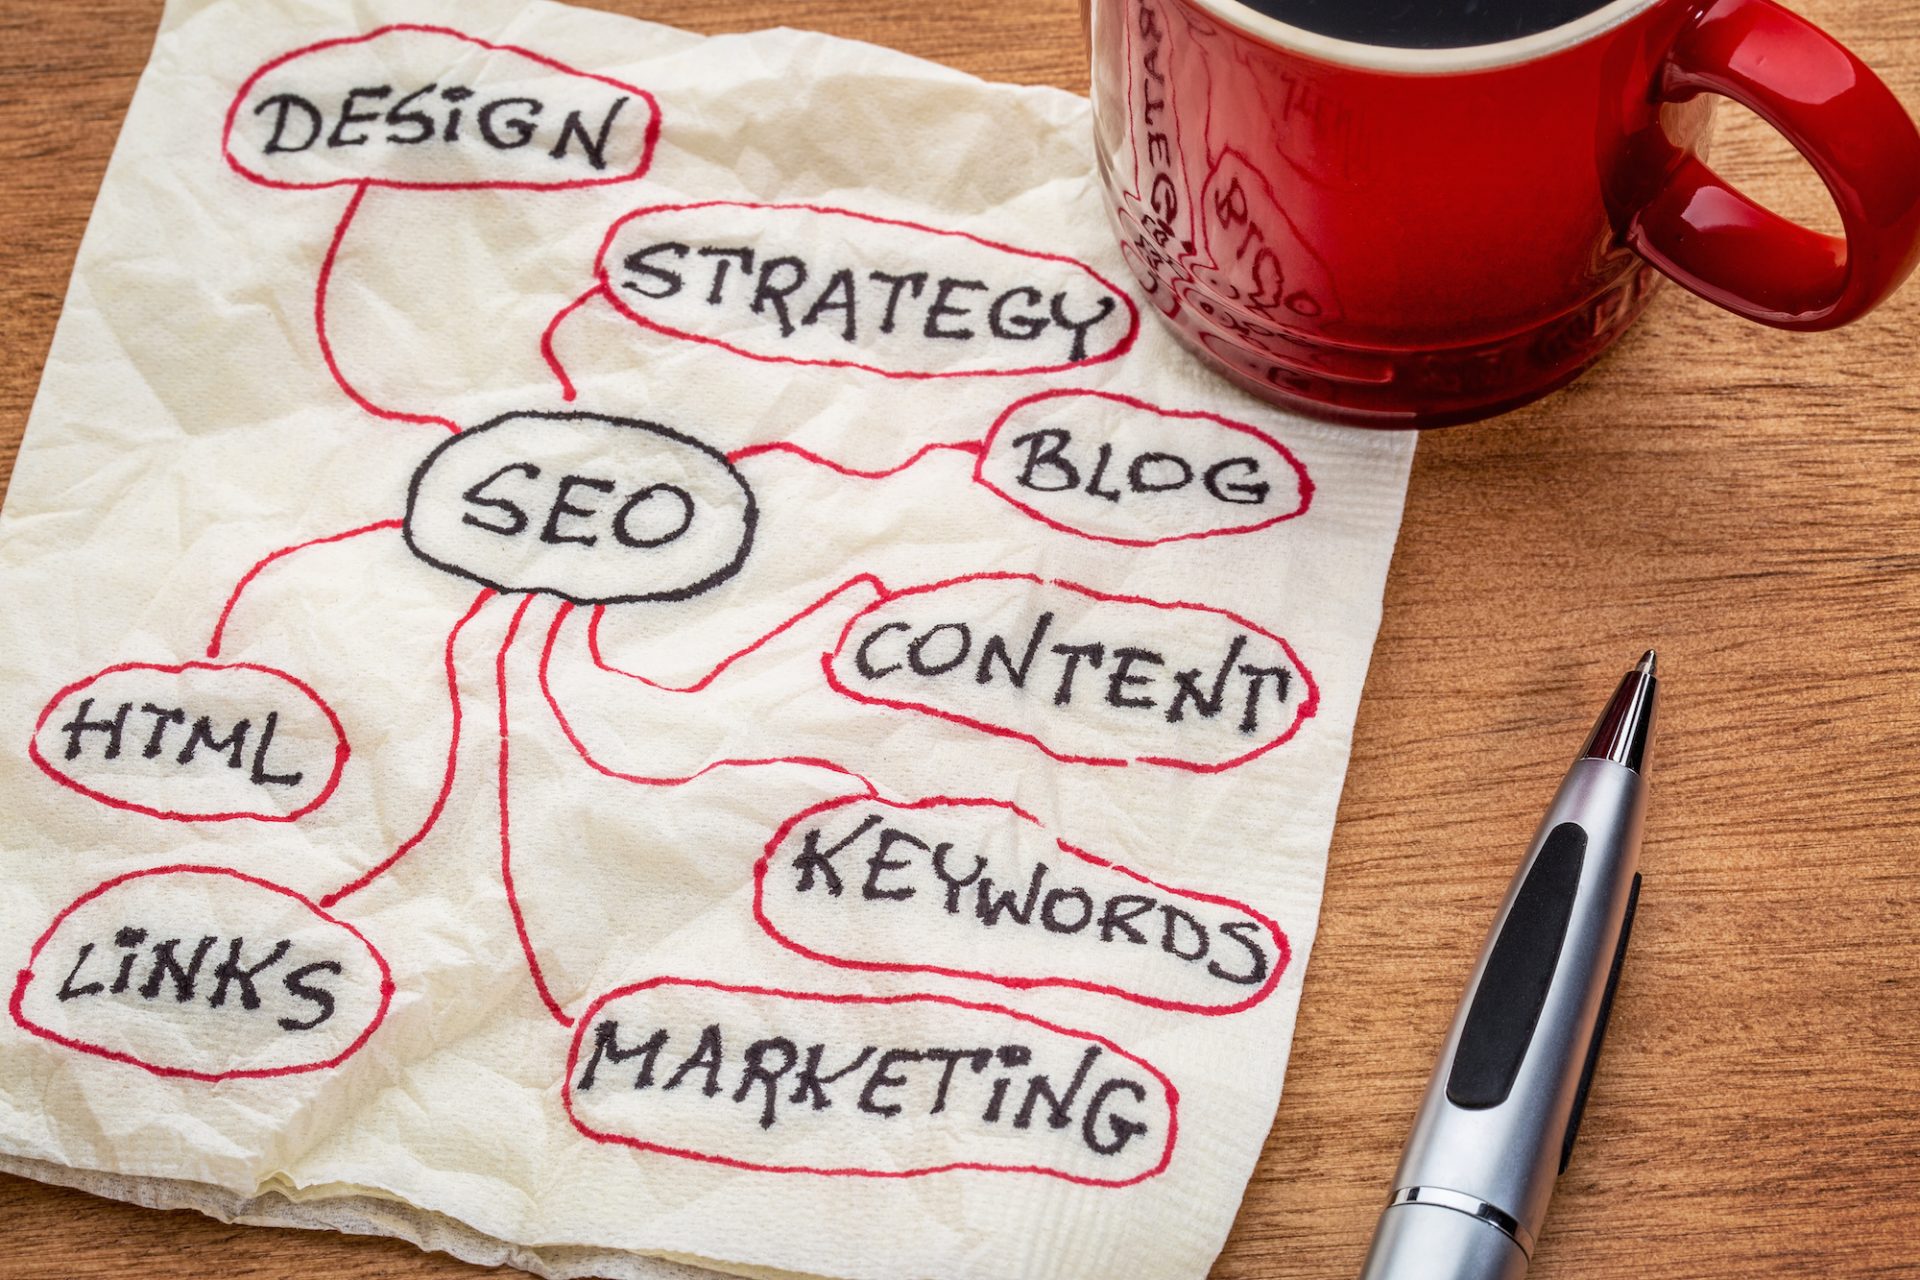 Seo strategy on a napkin with a cup of coffee, incorporating content keywords.